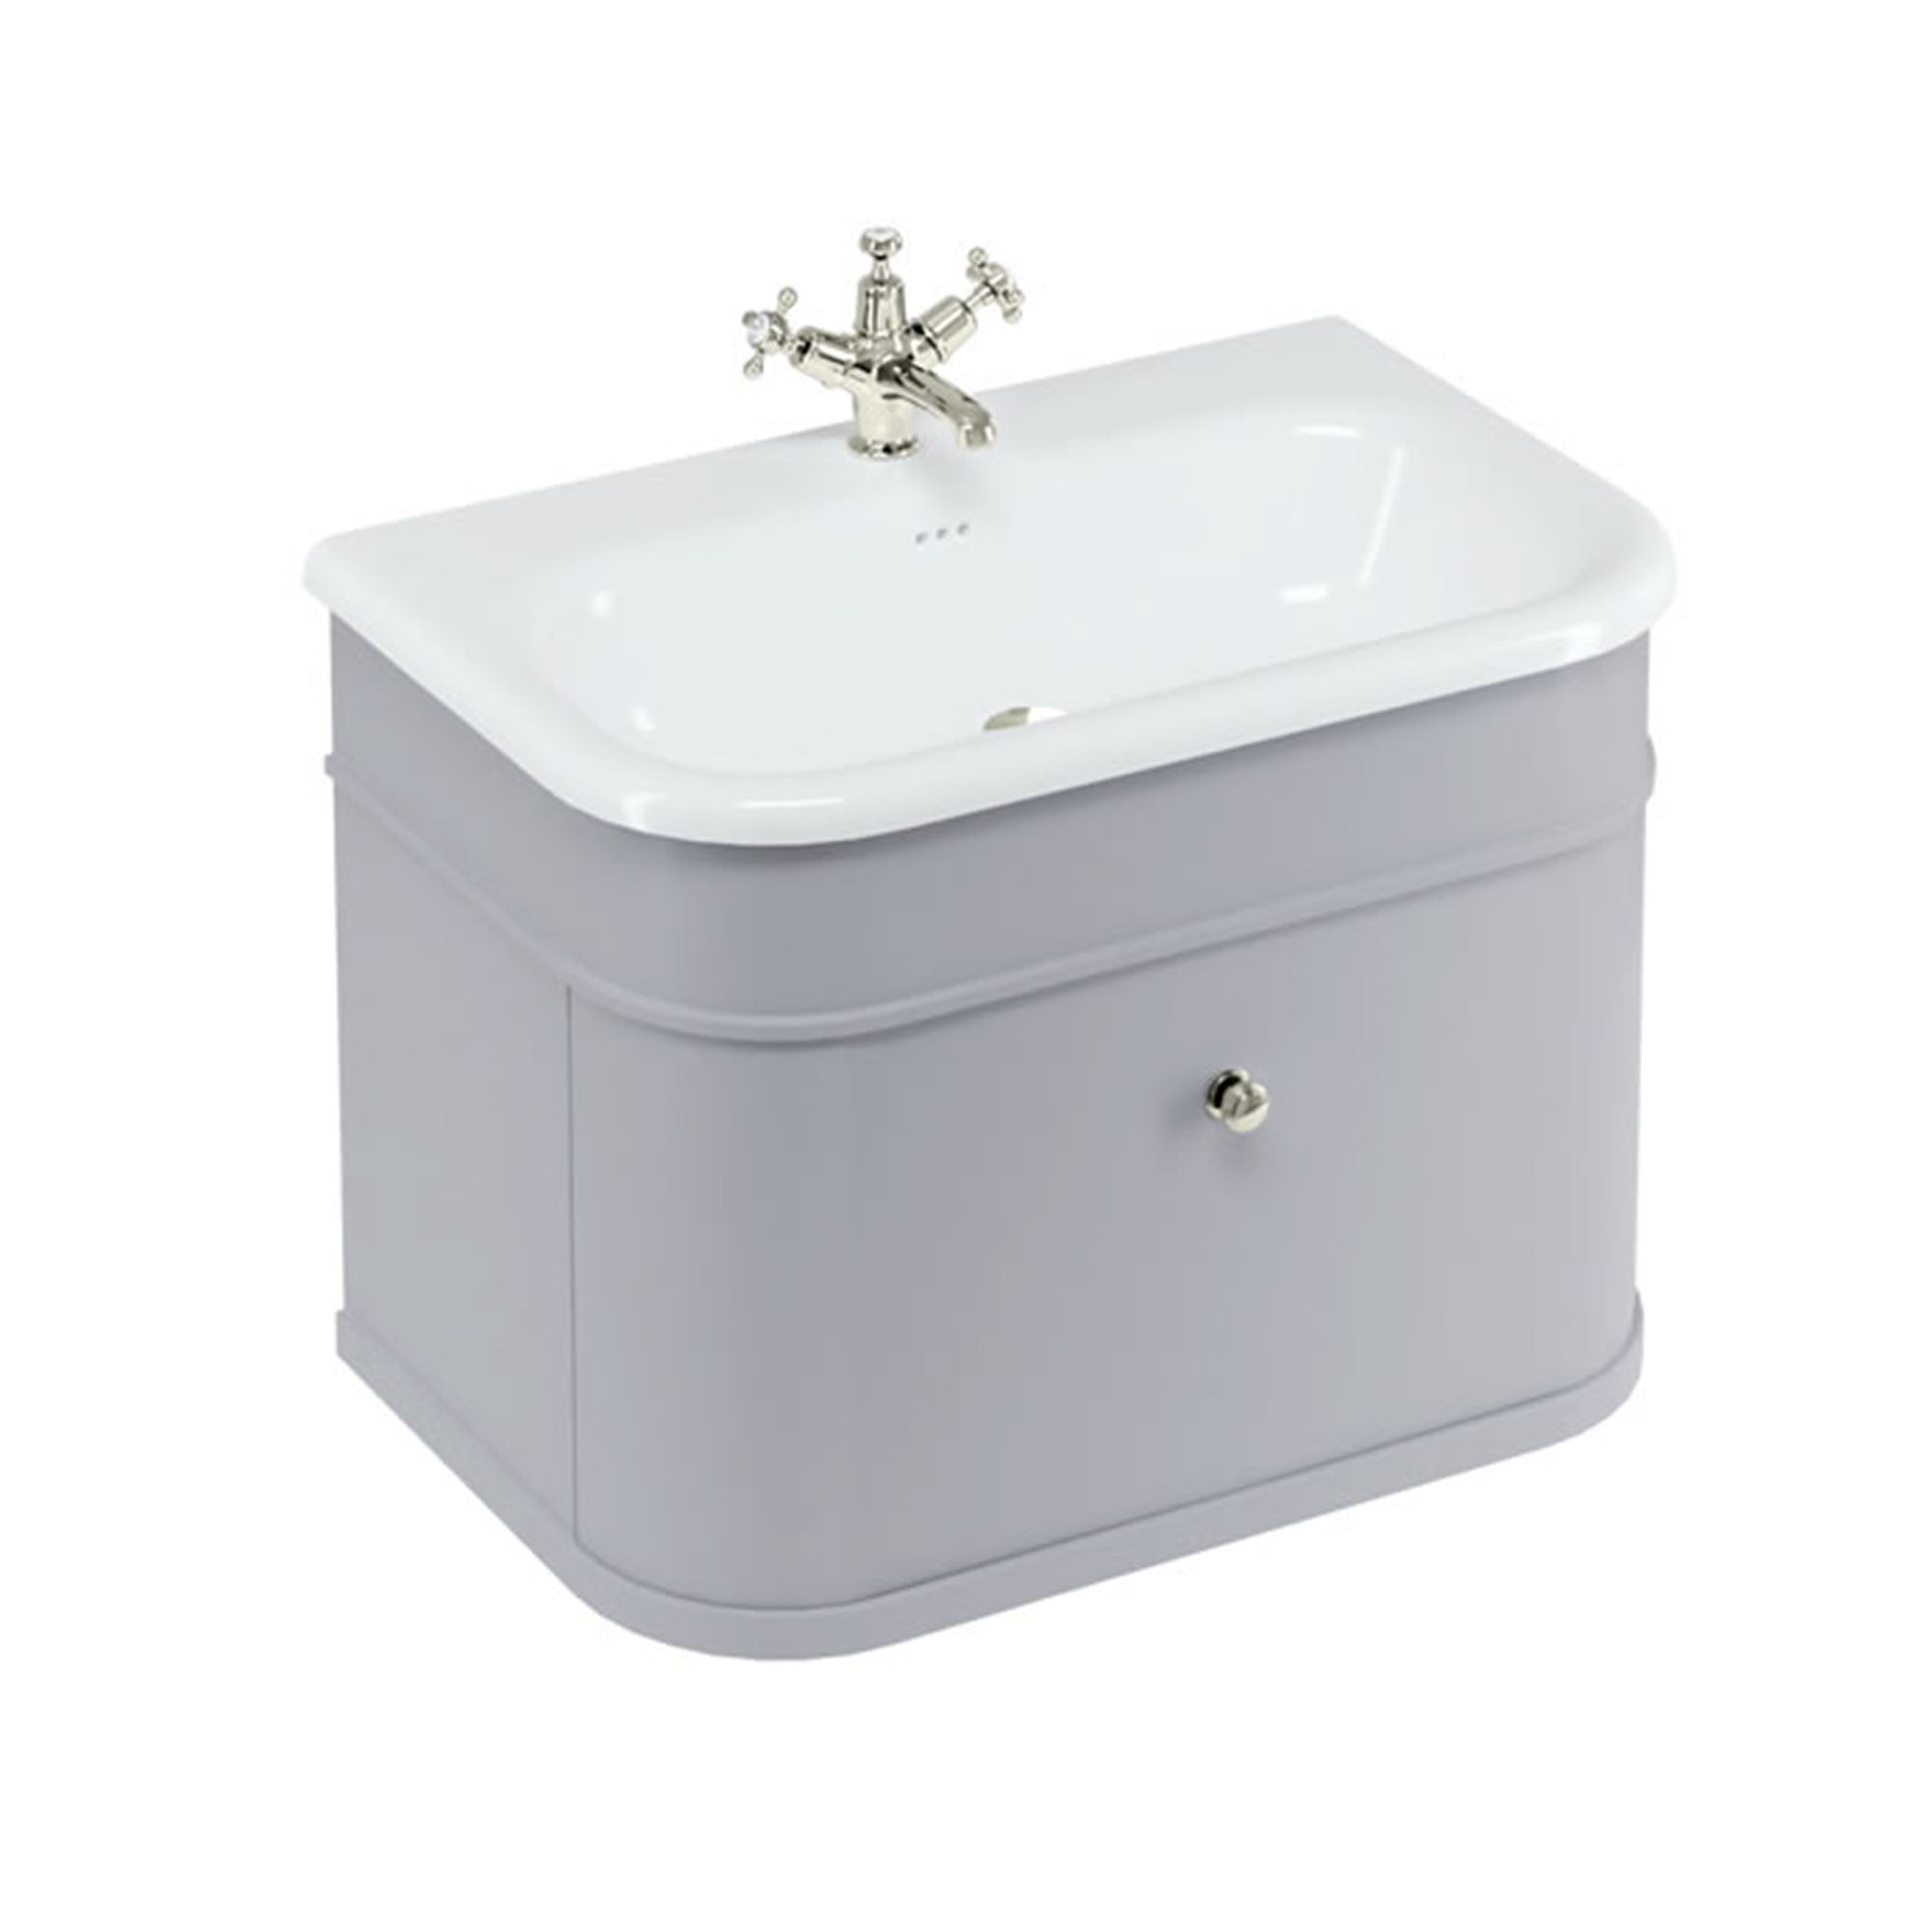 burlington chalfont 750mm wall mounted vanity with roll top basin classic grey